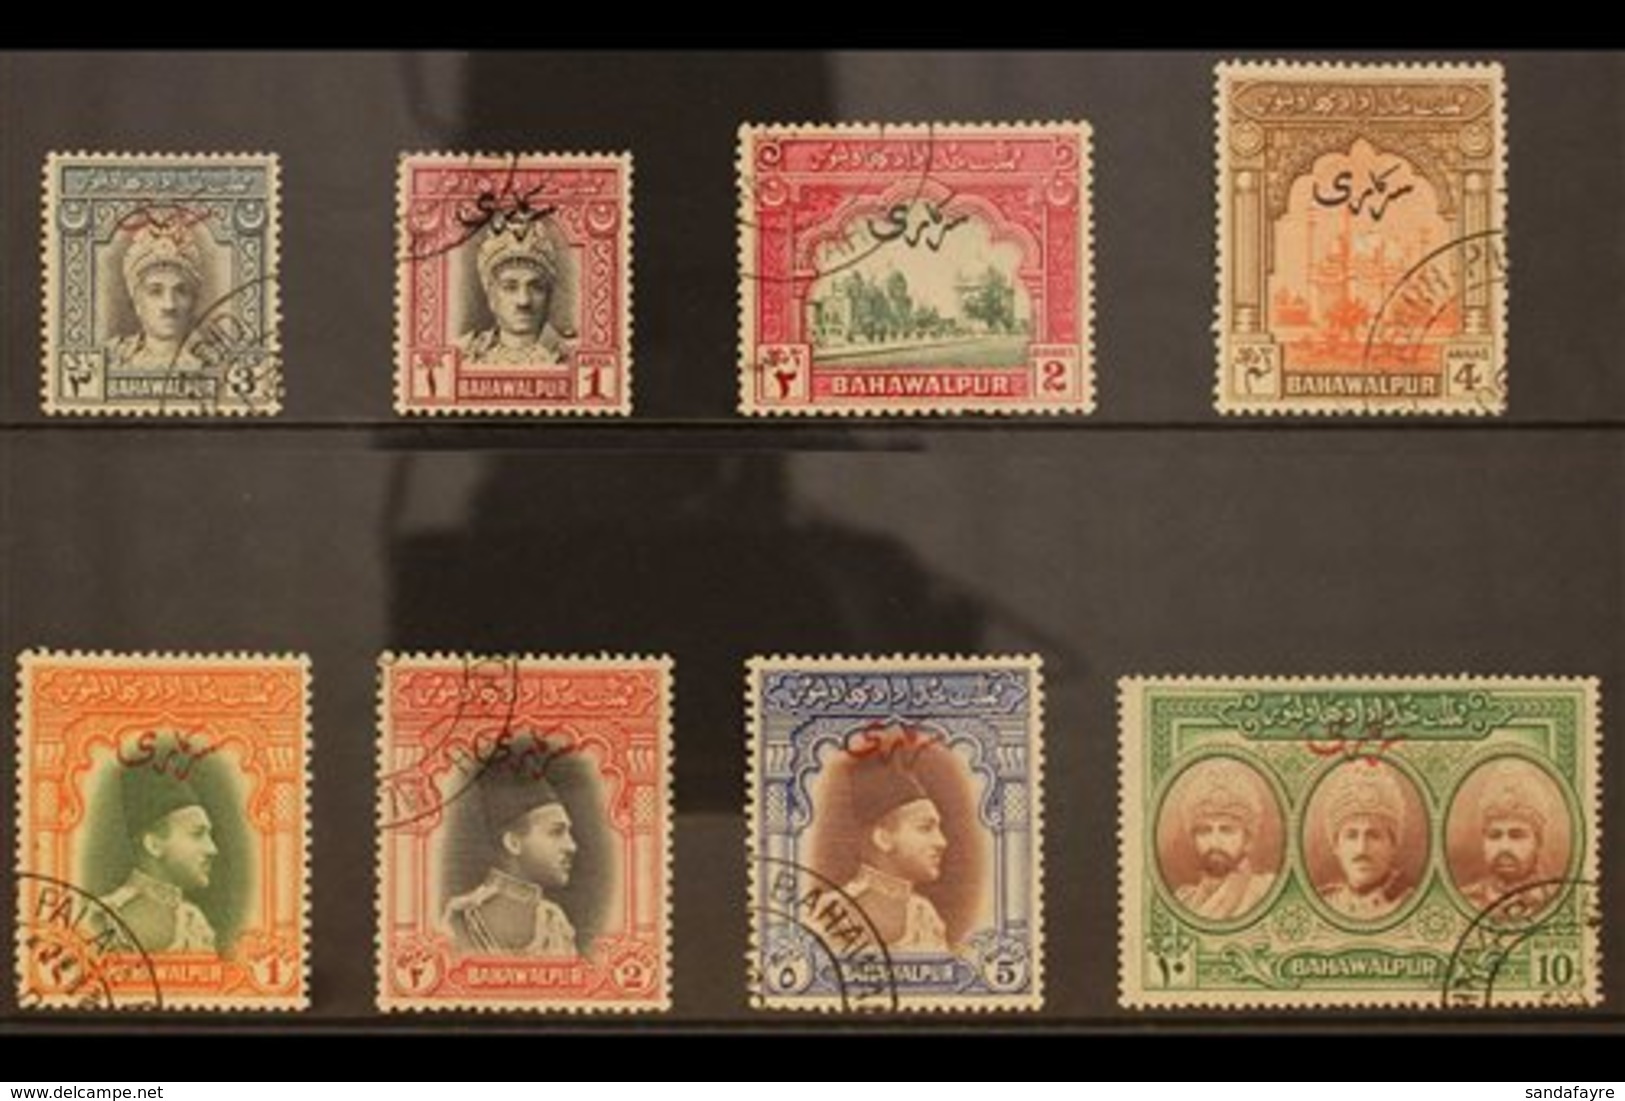 OFFICIALS 1948 Overprinted Complete Set, SAG O20/O27, Very Fine Cds Used (8 Stamps) For More Images, Please Visit Http:/ - Bahawalpur